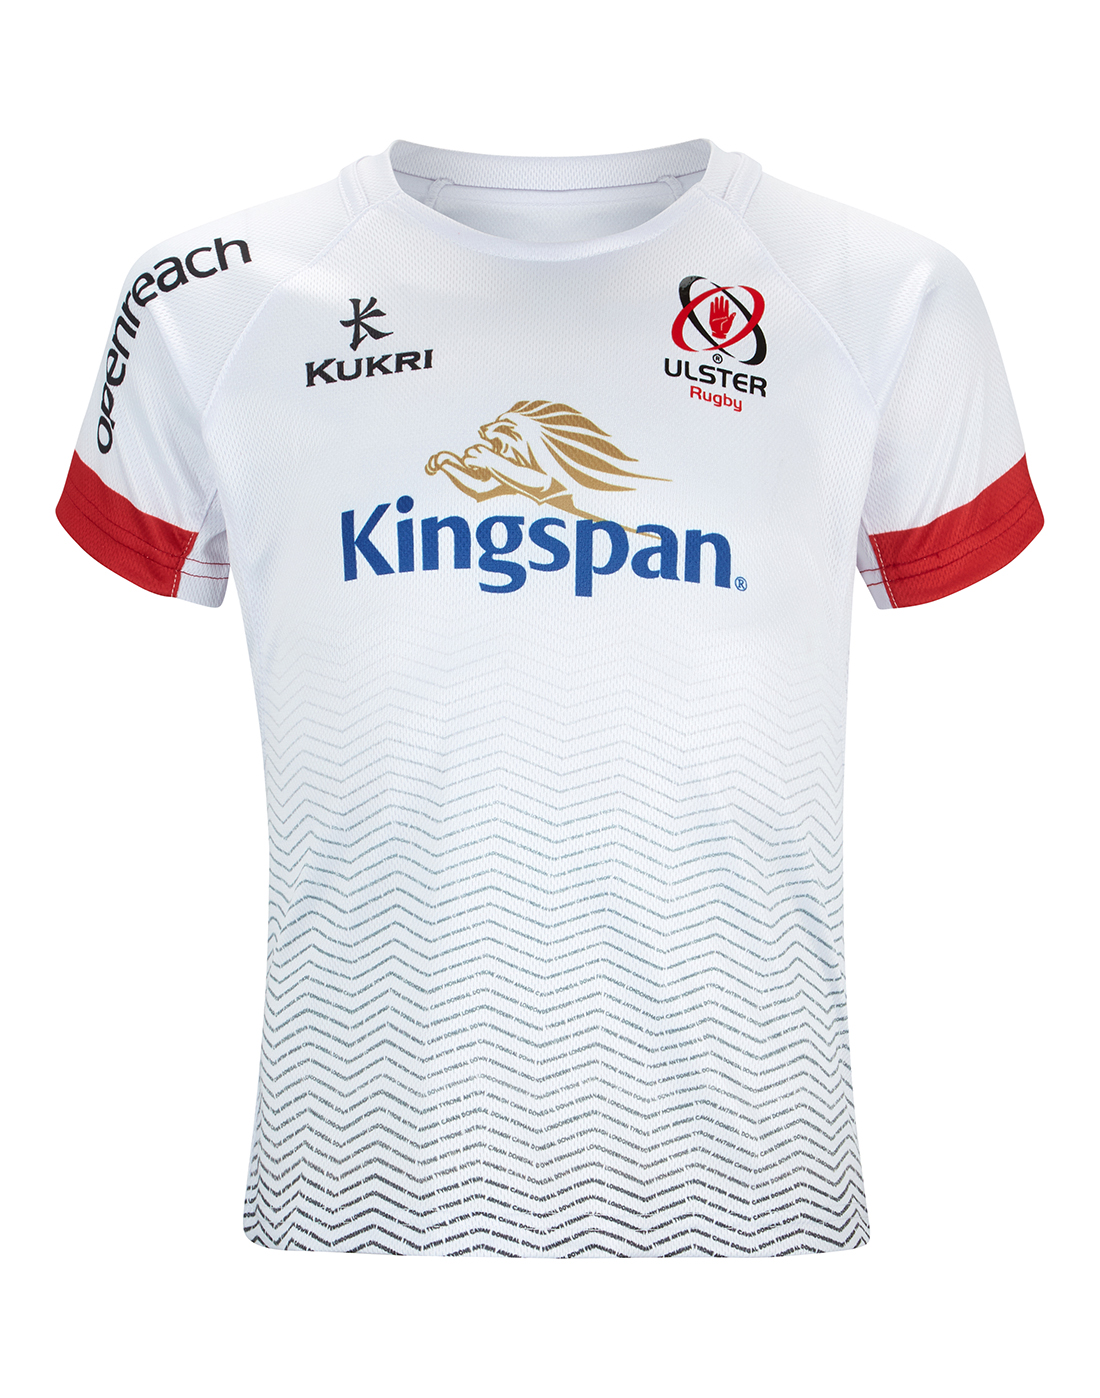 New Ulster Rugby Kukri T-Shirt Kid's Training Lifetstyle Logo Top 